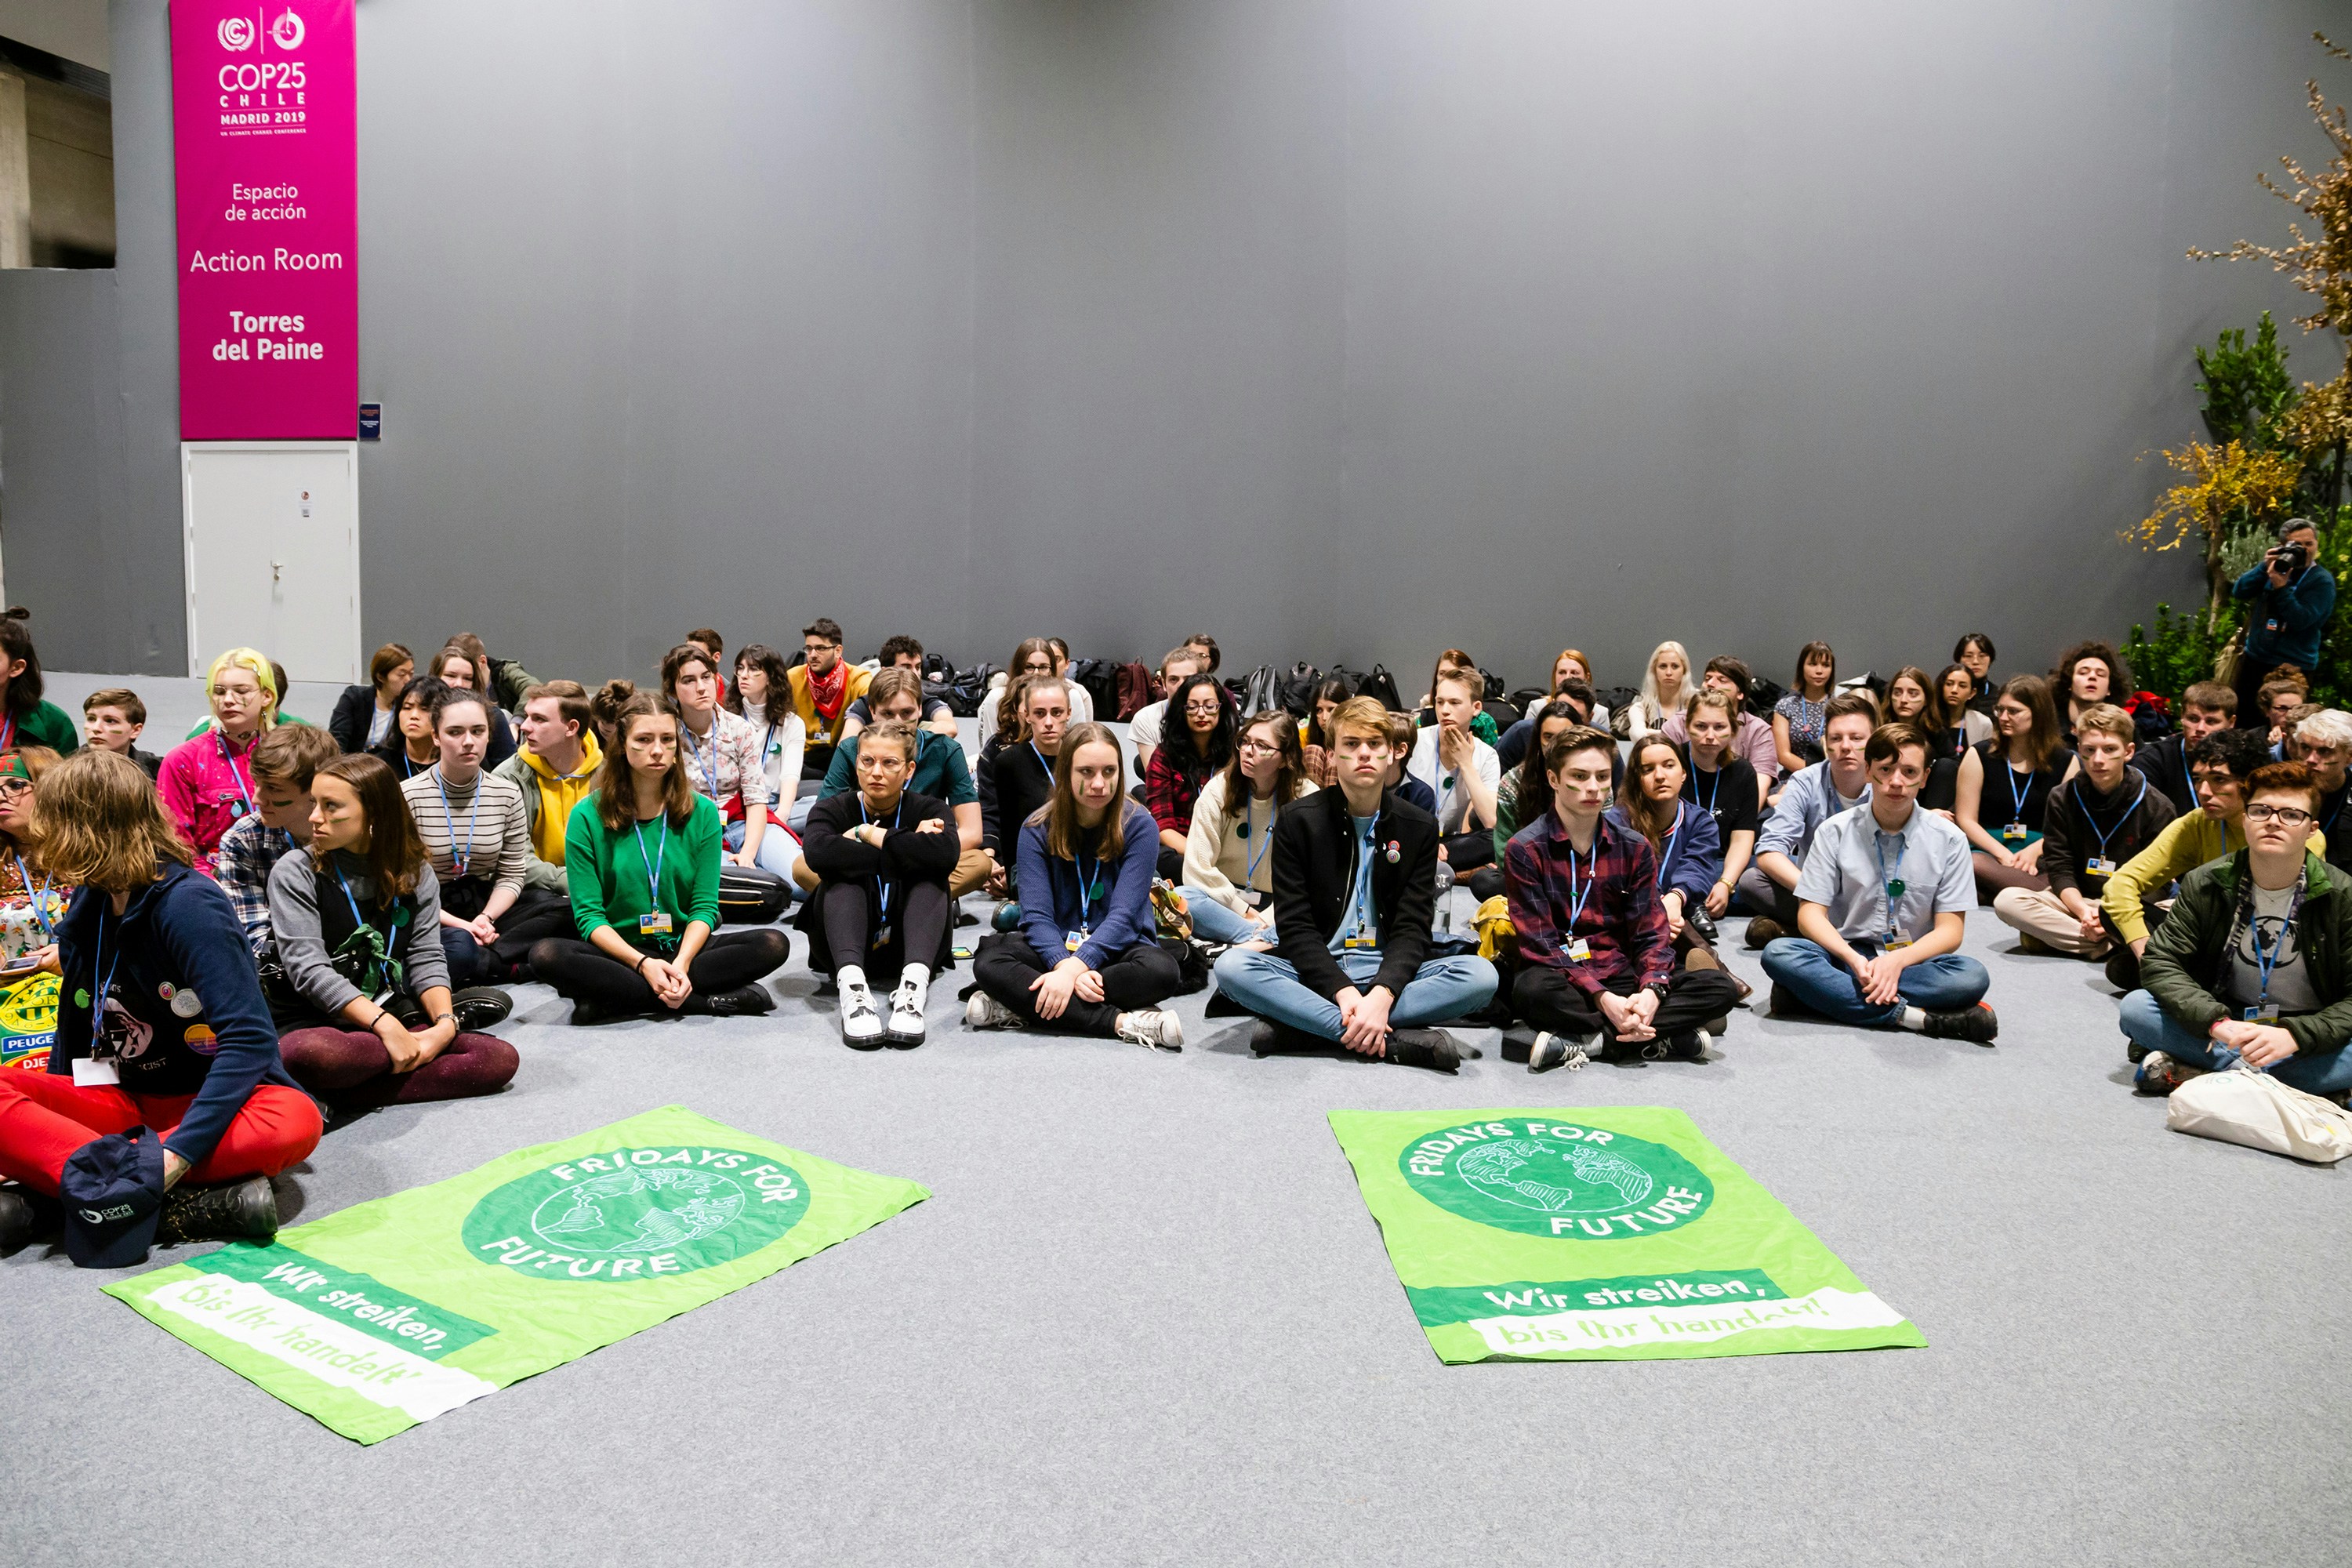 Youth strikers to stage sit-in at un climate talks during the Conference of the Parties to the United Nations Framework Convention on Climate Change -COP25 on day 6, in December 6, 2019 in Madrid, Spain. (Photo by Rita Franca/NurPhoto via Getty Images)